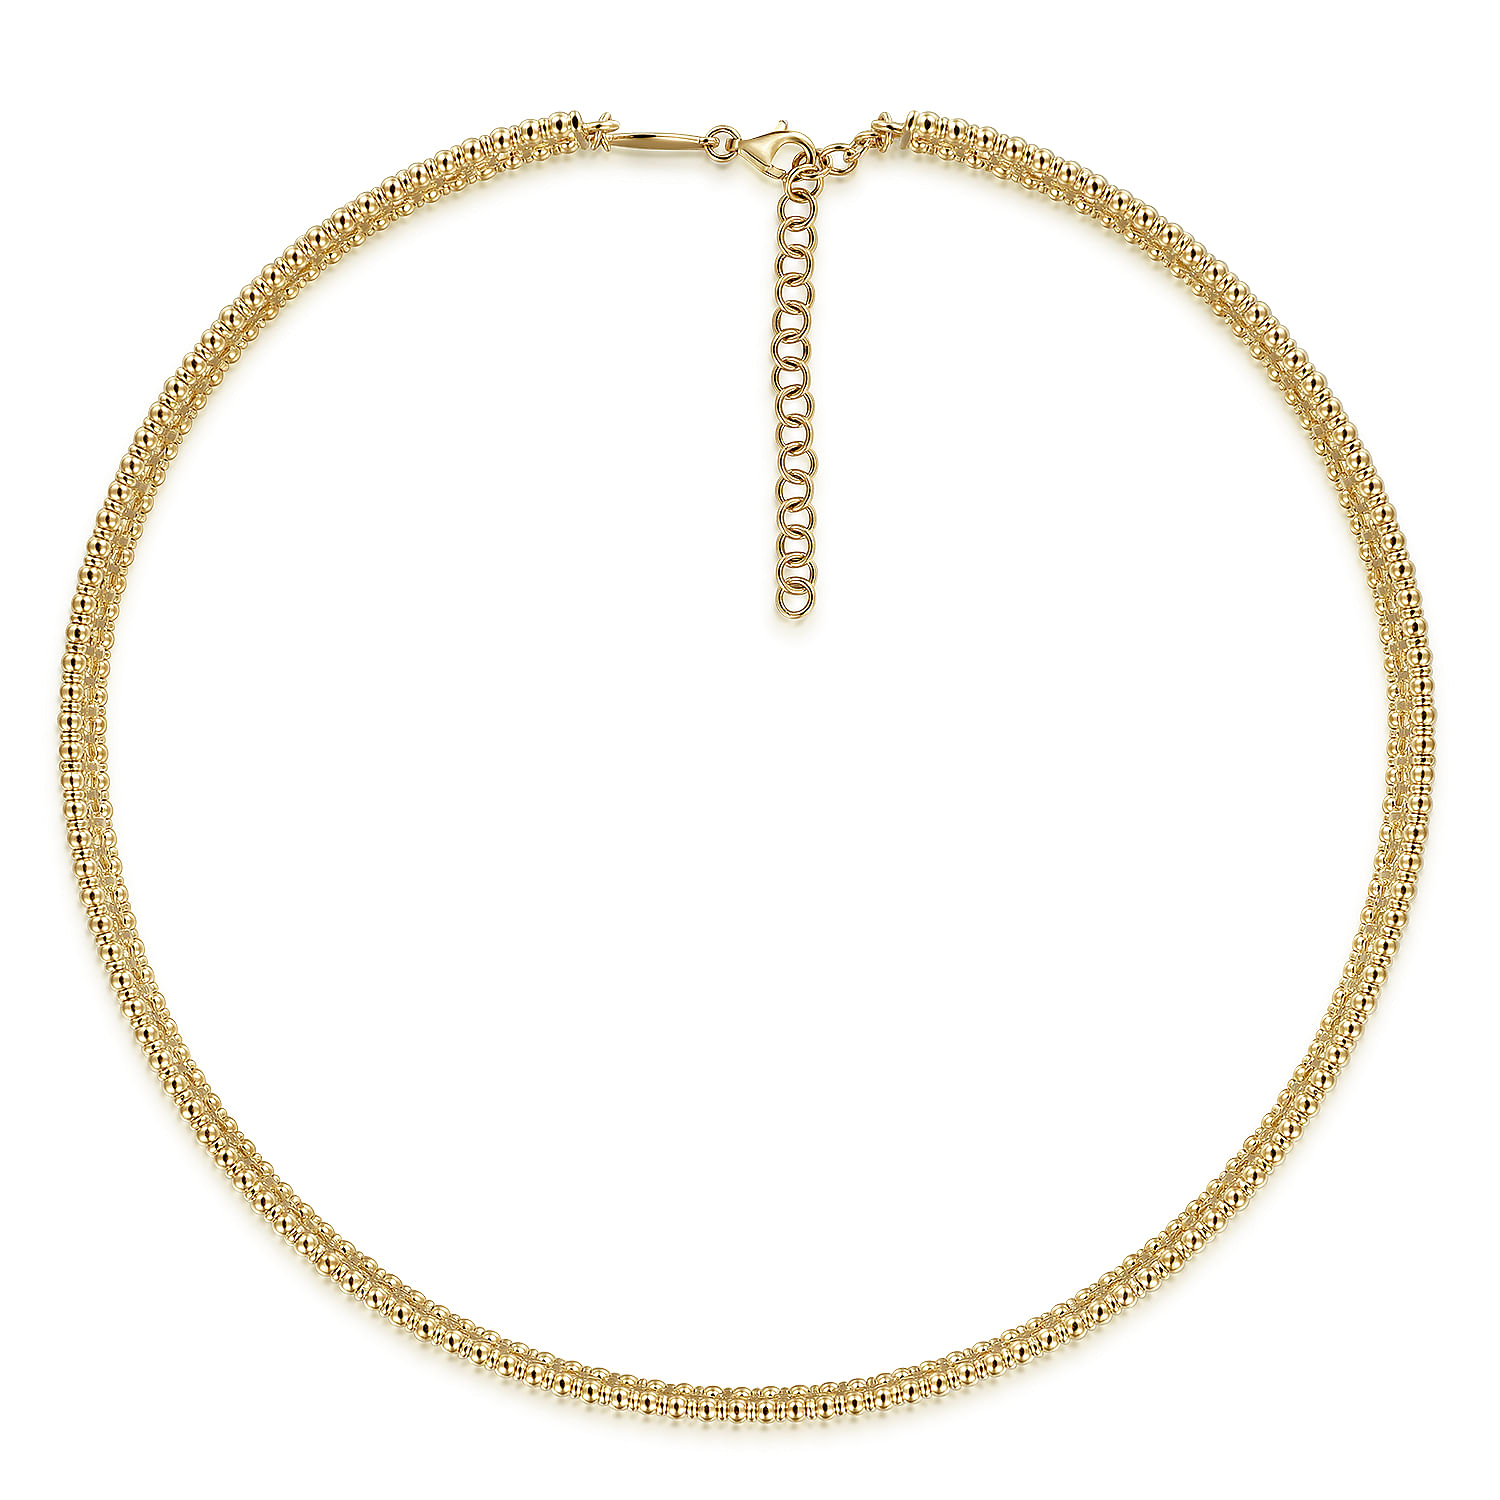 14K Yellow Gold Wide Diamond Station Choker Necklace with Bujukan Beads, 11.5+4 inch